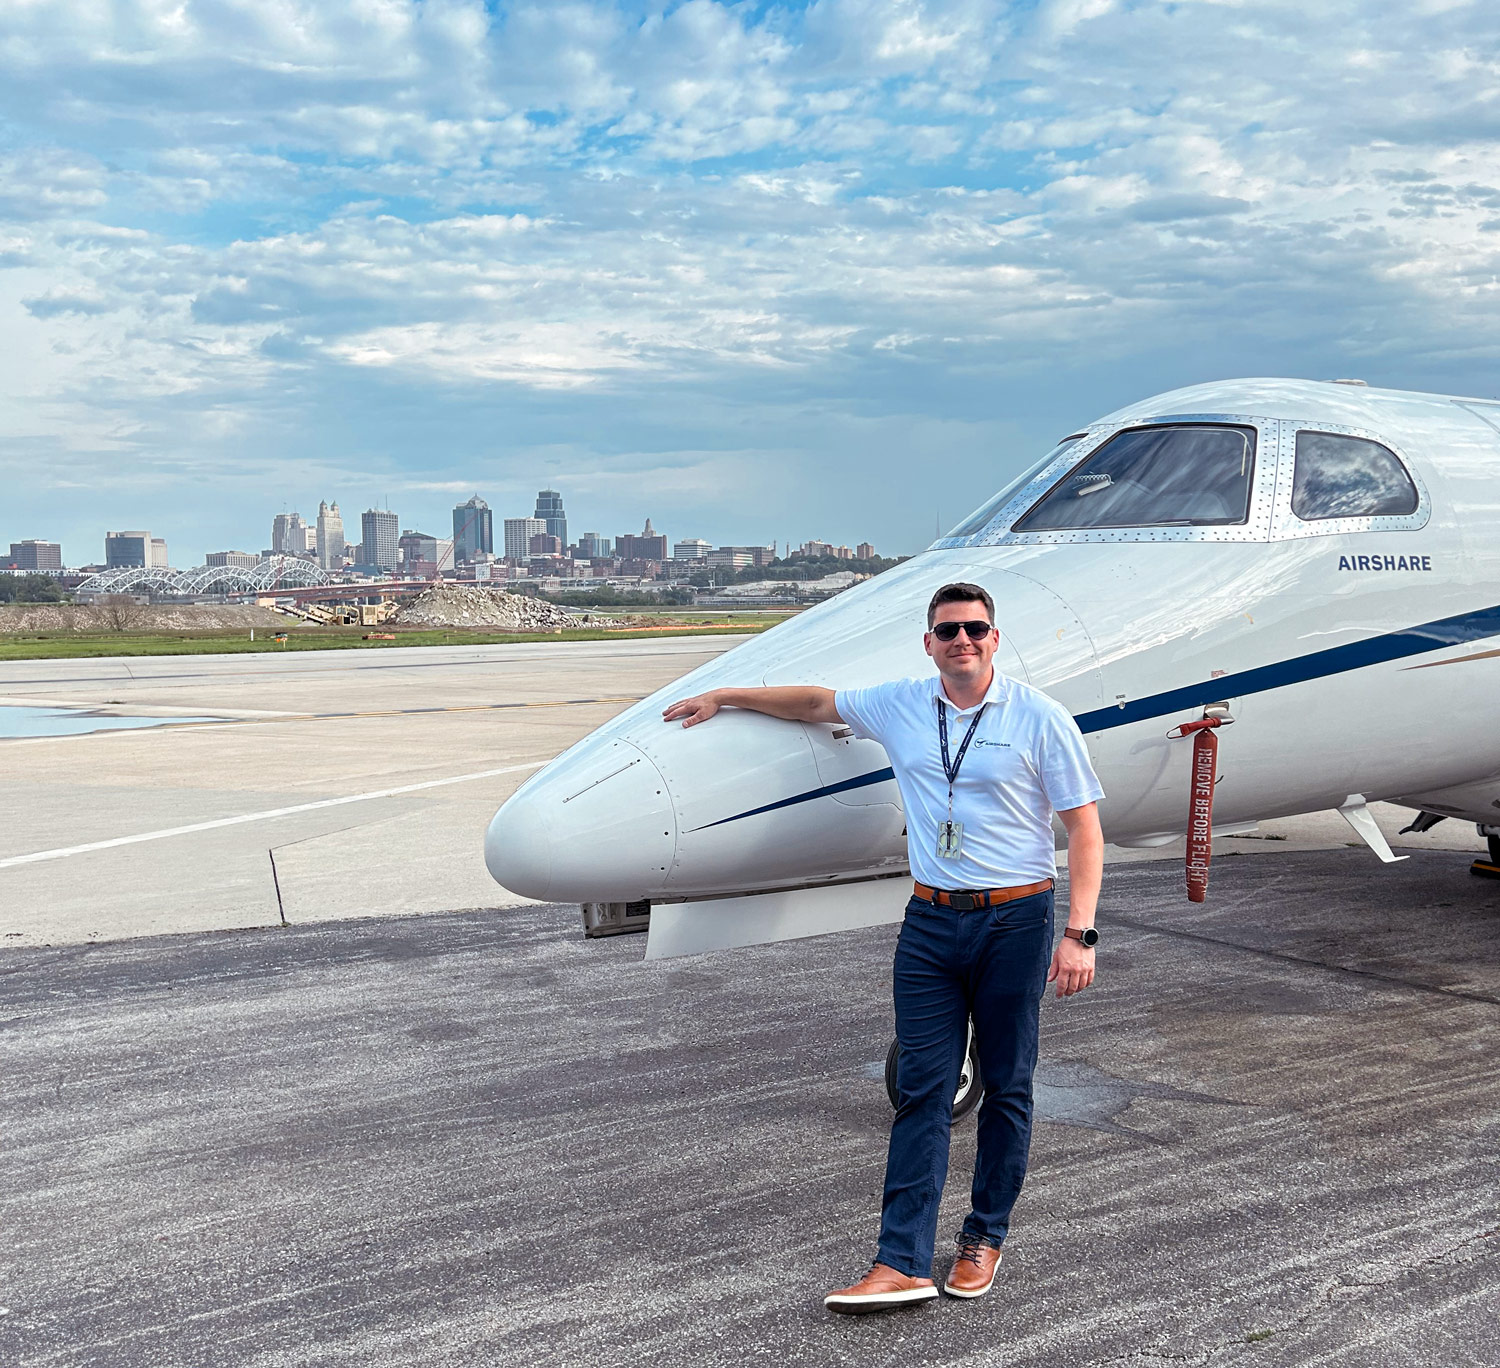 Steve Wynne, standing at the nose of an Airshare Phenom 300 in front of a city skyline.